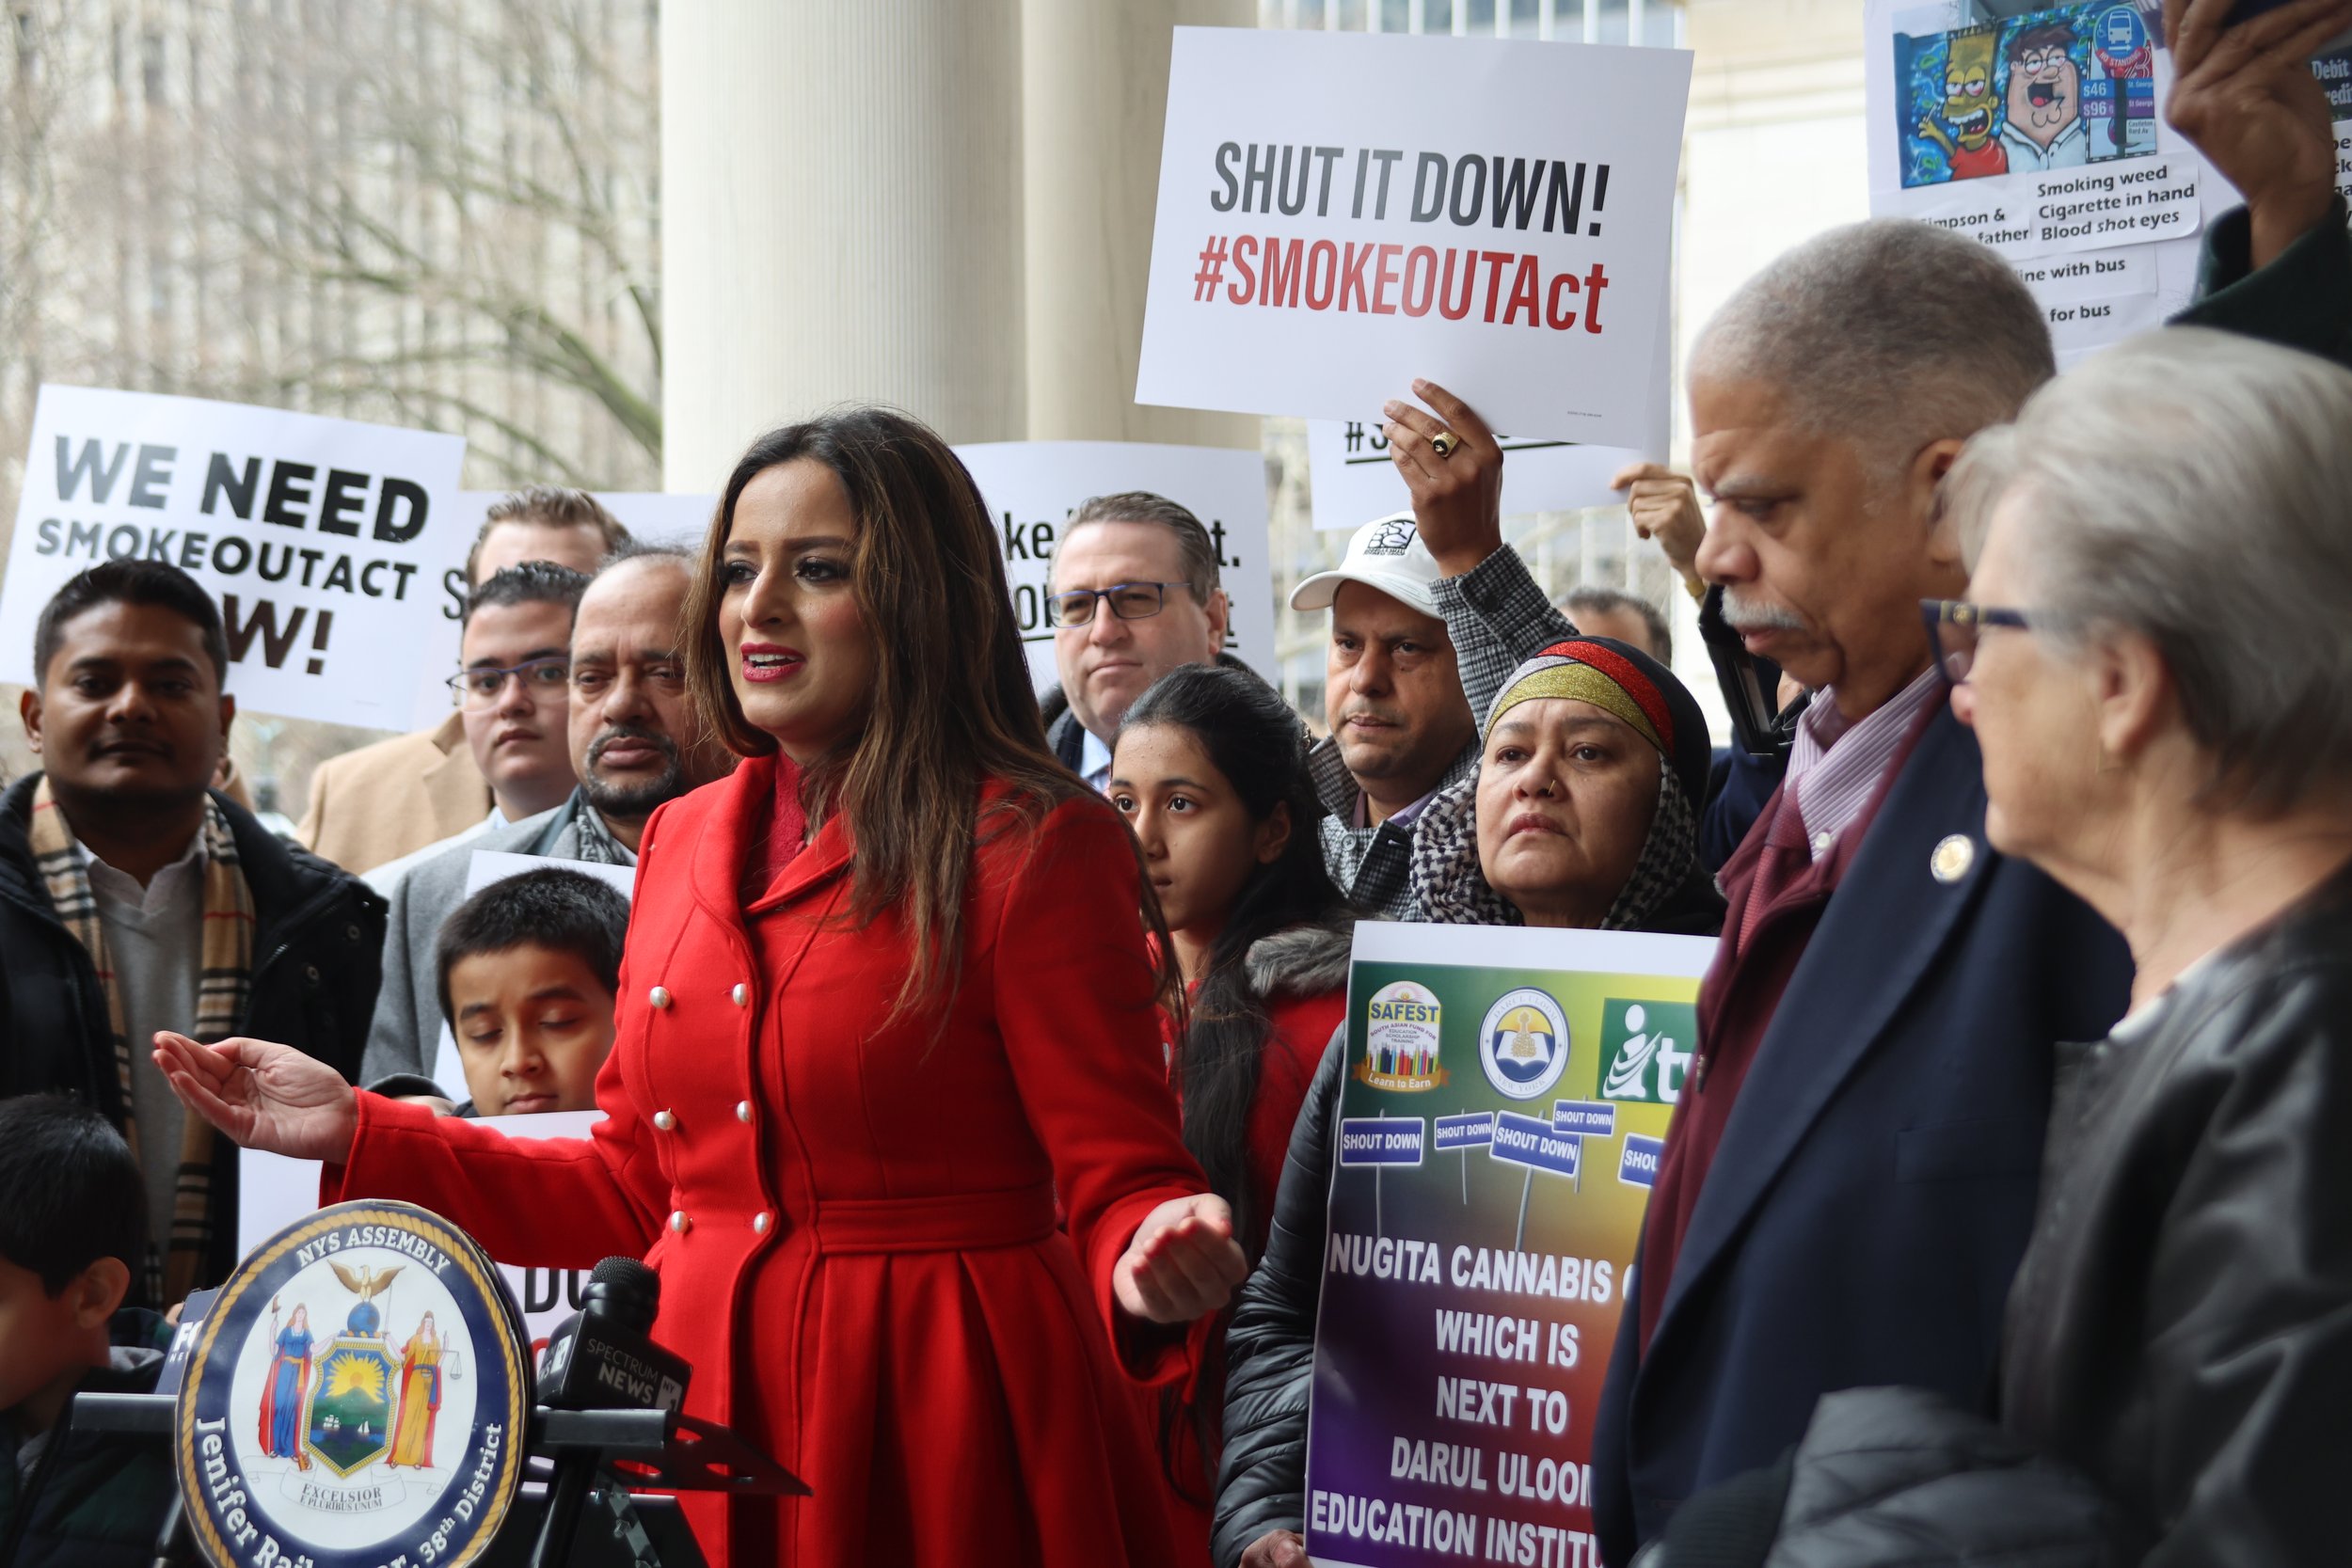 State Assemblywoman Jenifer Rajkumar Hosts Albany “SMOKEOUT Act” Rally Calling For Bill’s Passage In State Budget